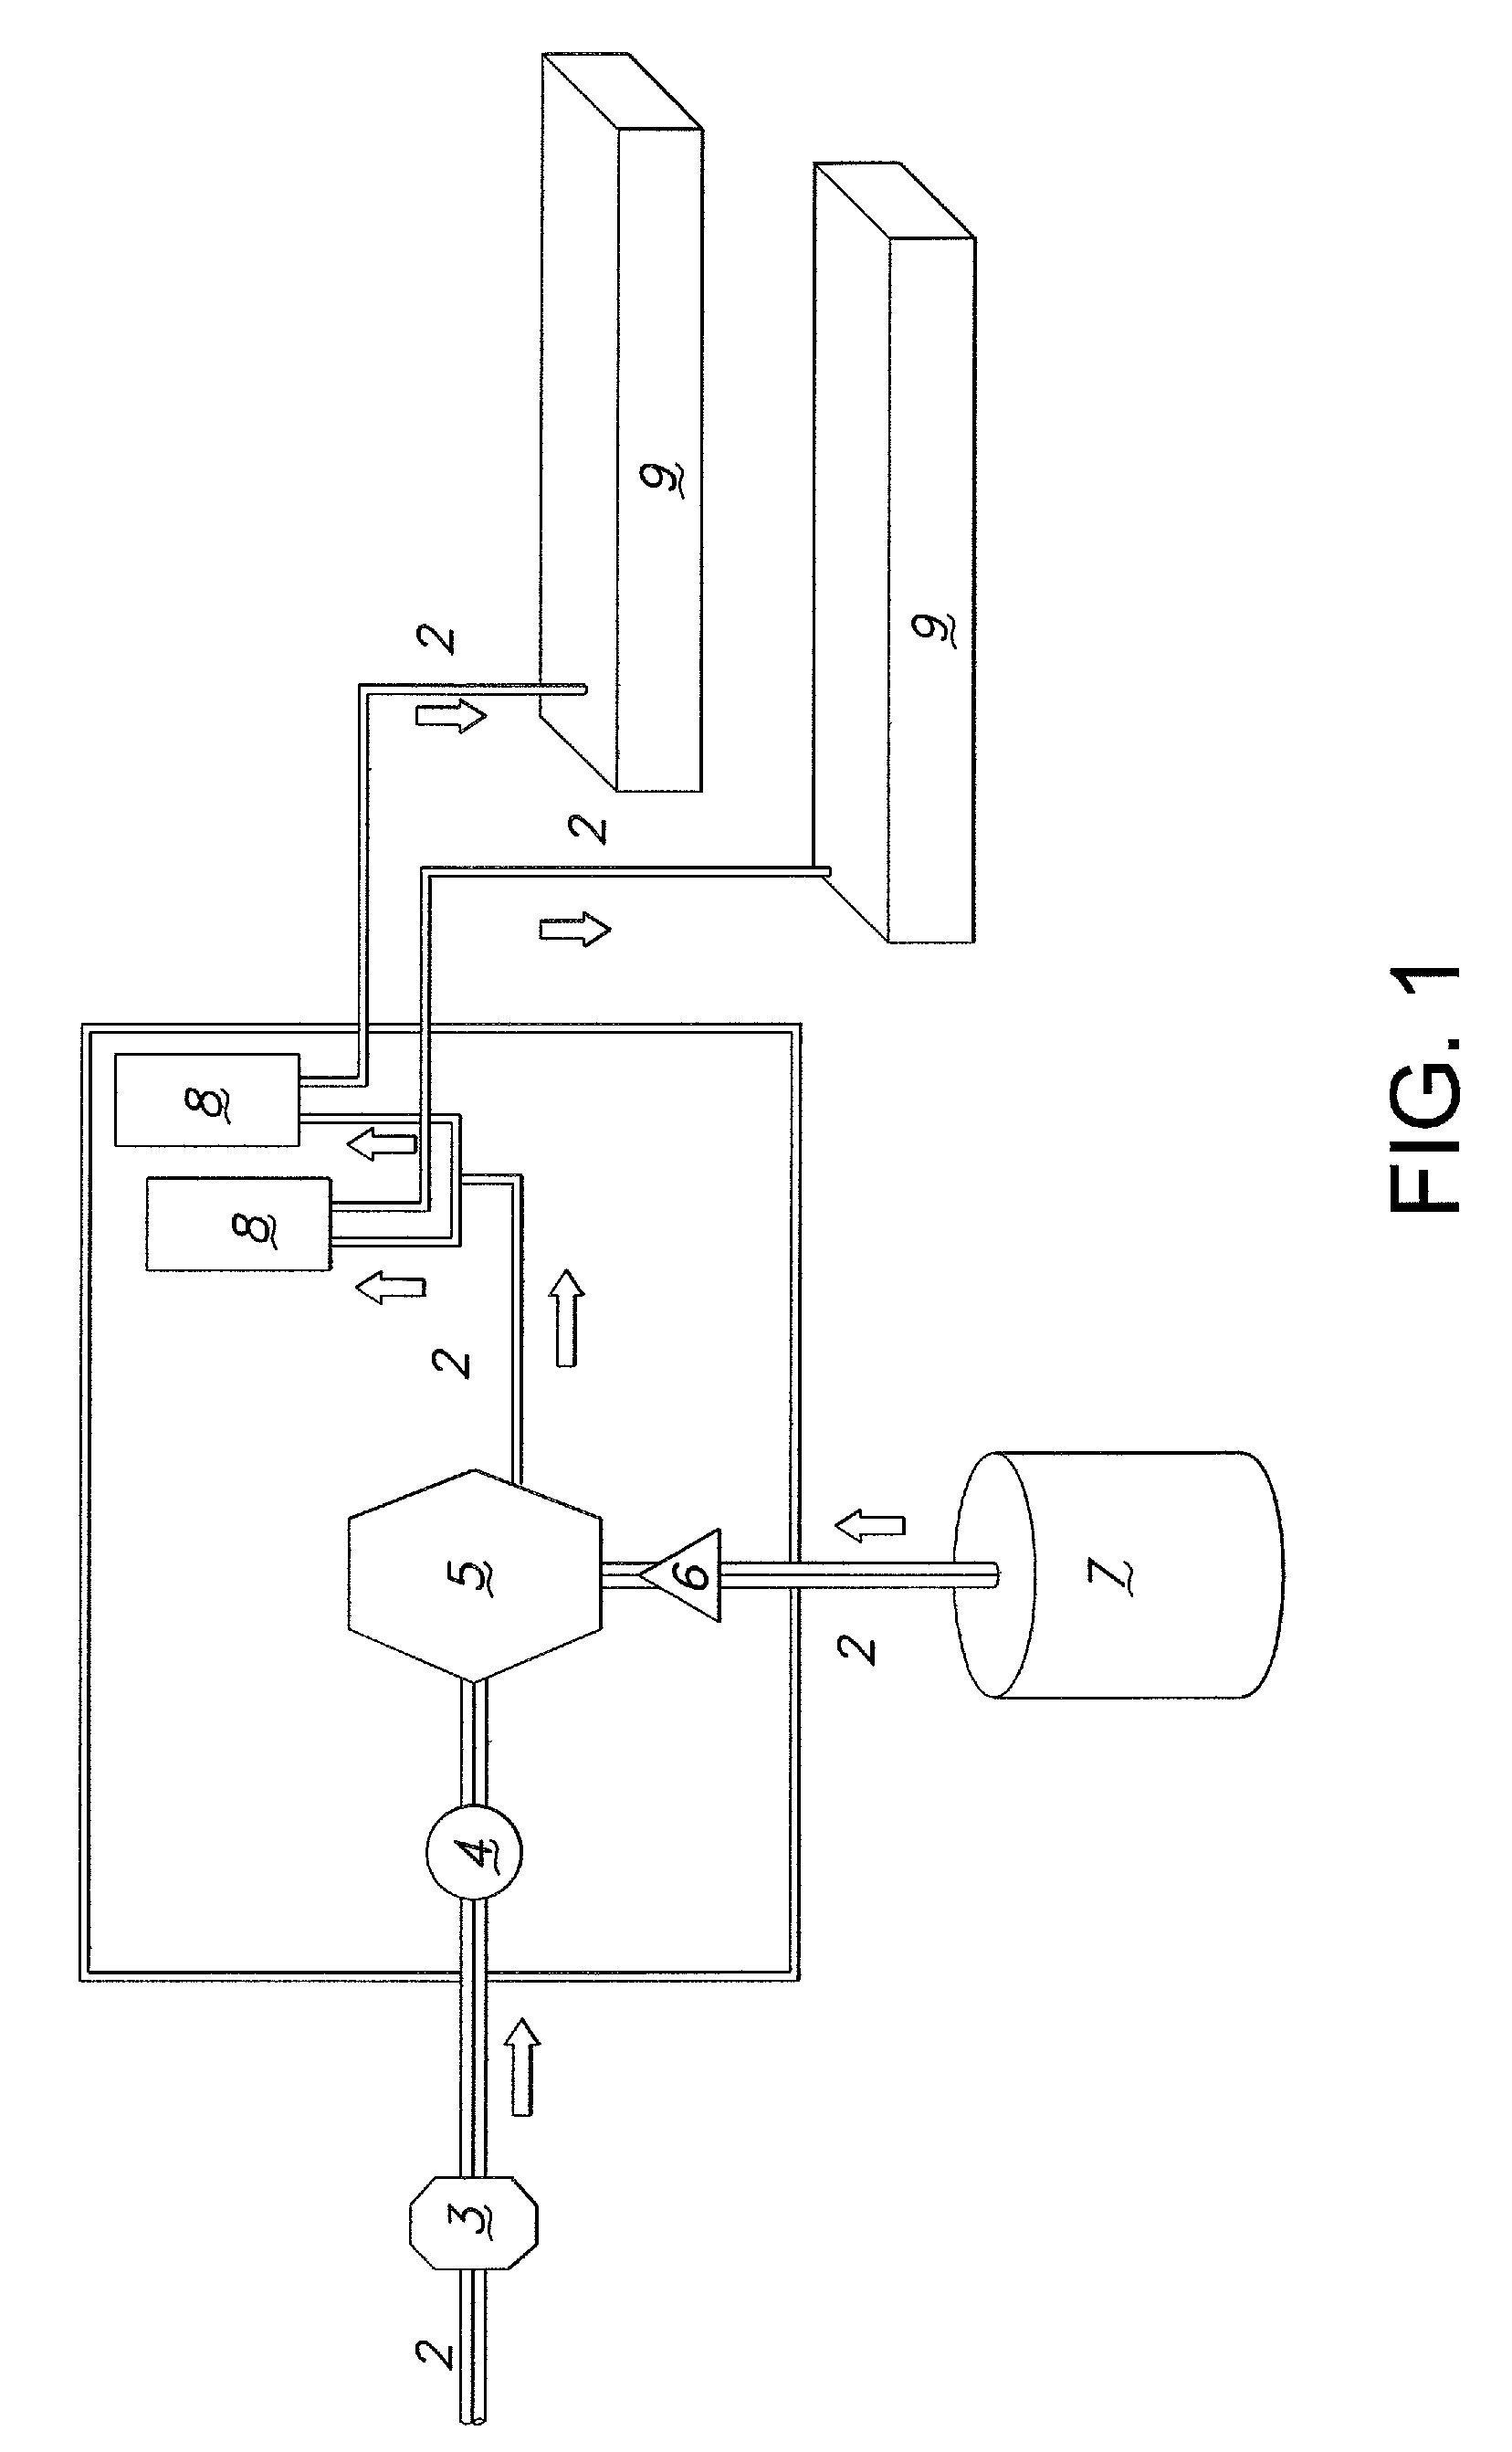 Method and apparatus for applying hoof care, sanitizing, or treatment solutions to the feet or hooves of animals